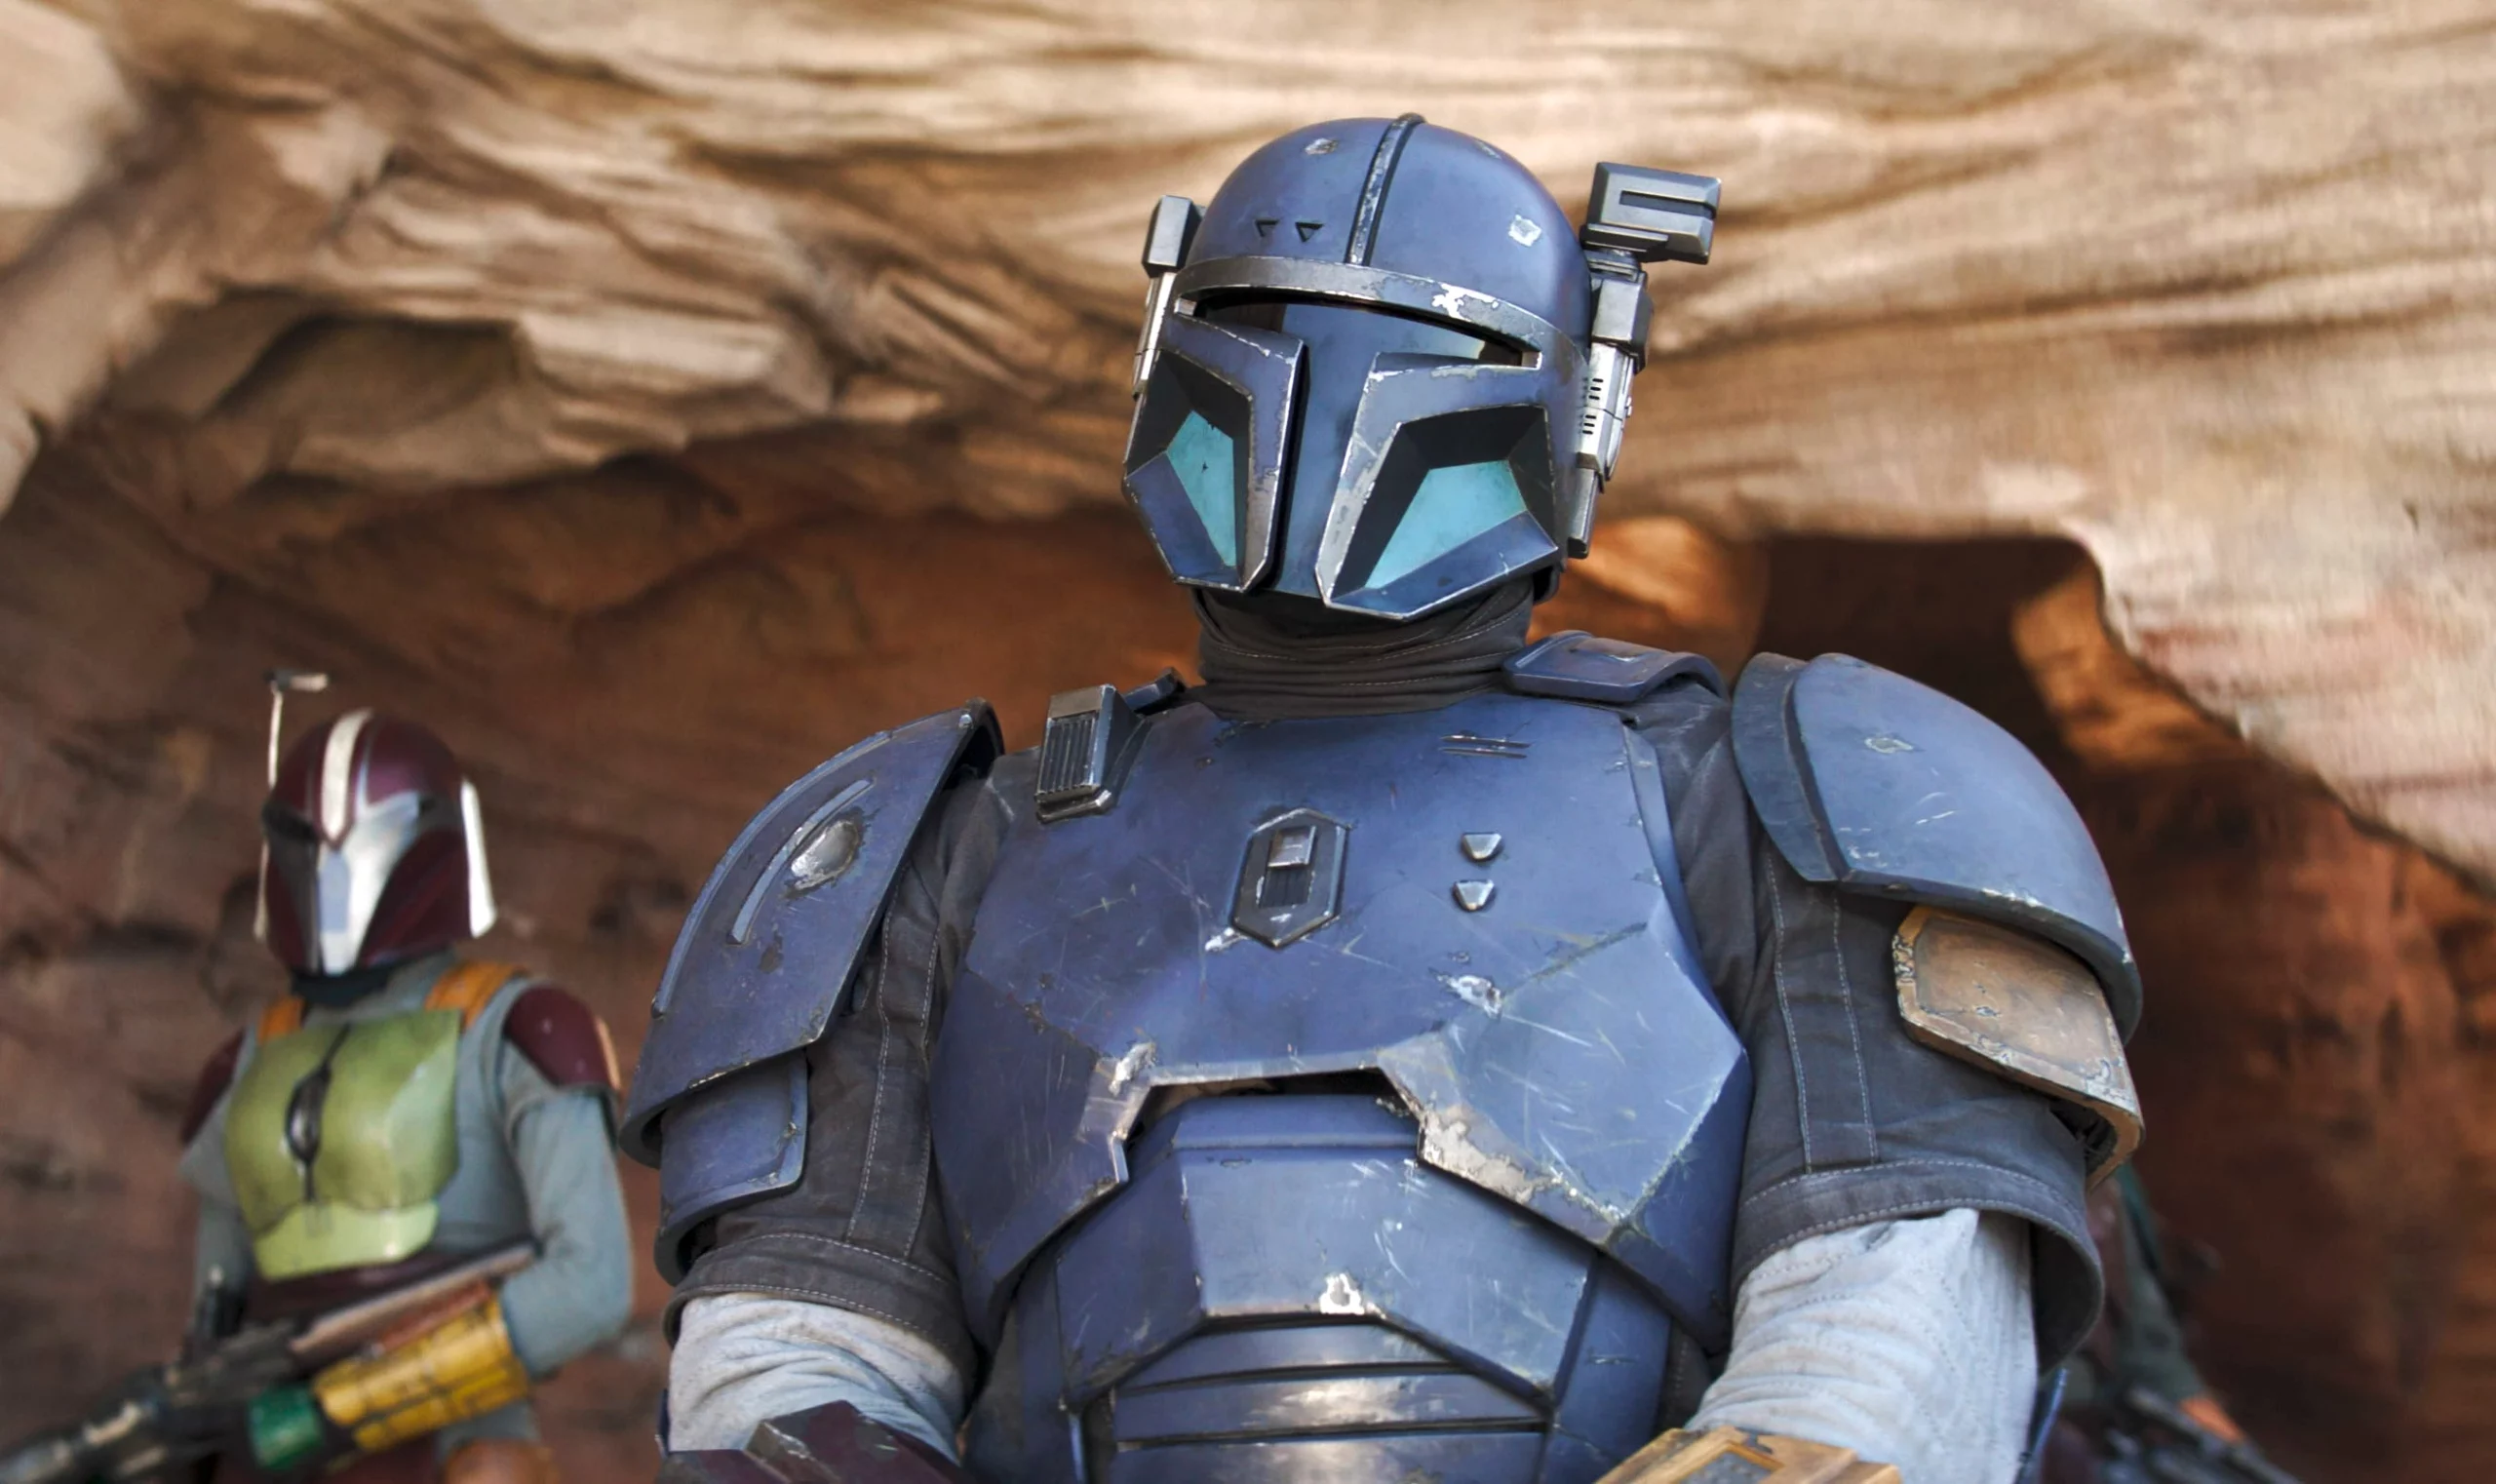 The Mandalorian Season 3 Episode 7 Watch Online, Release Date, Time, Preview, and More